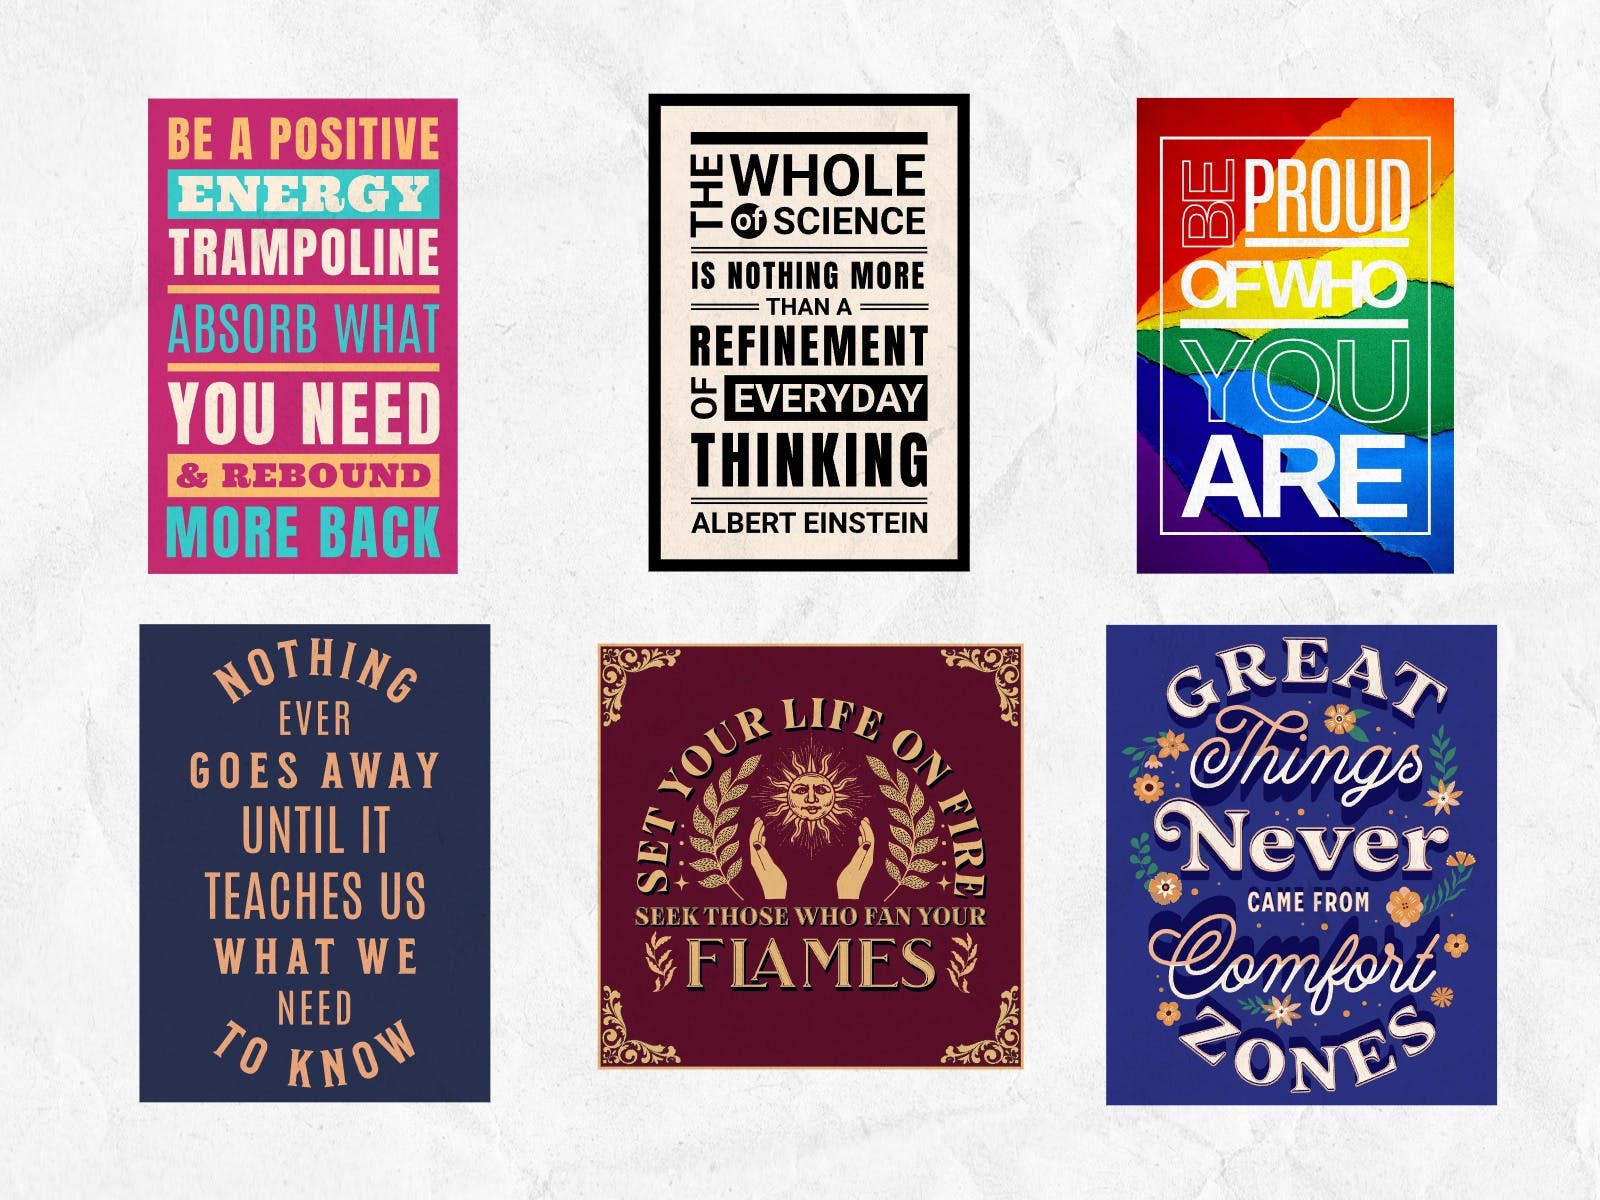 Most Popular Inspirational Posters Collection in Kittl - Empowering Quotes and Motivating Images